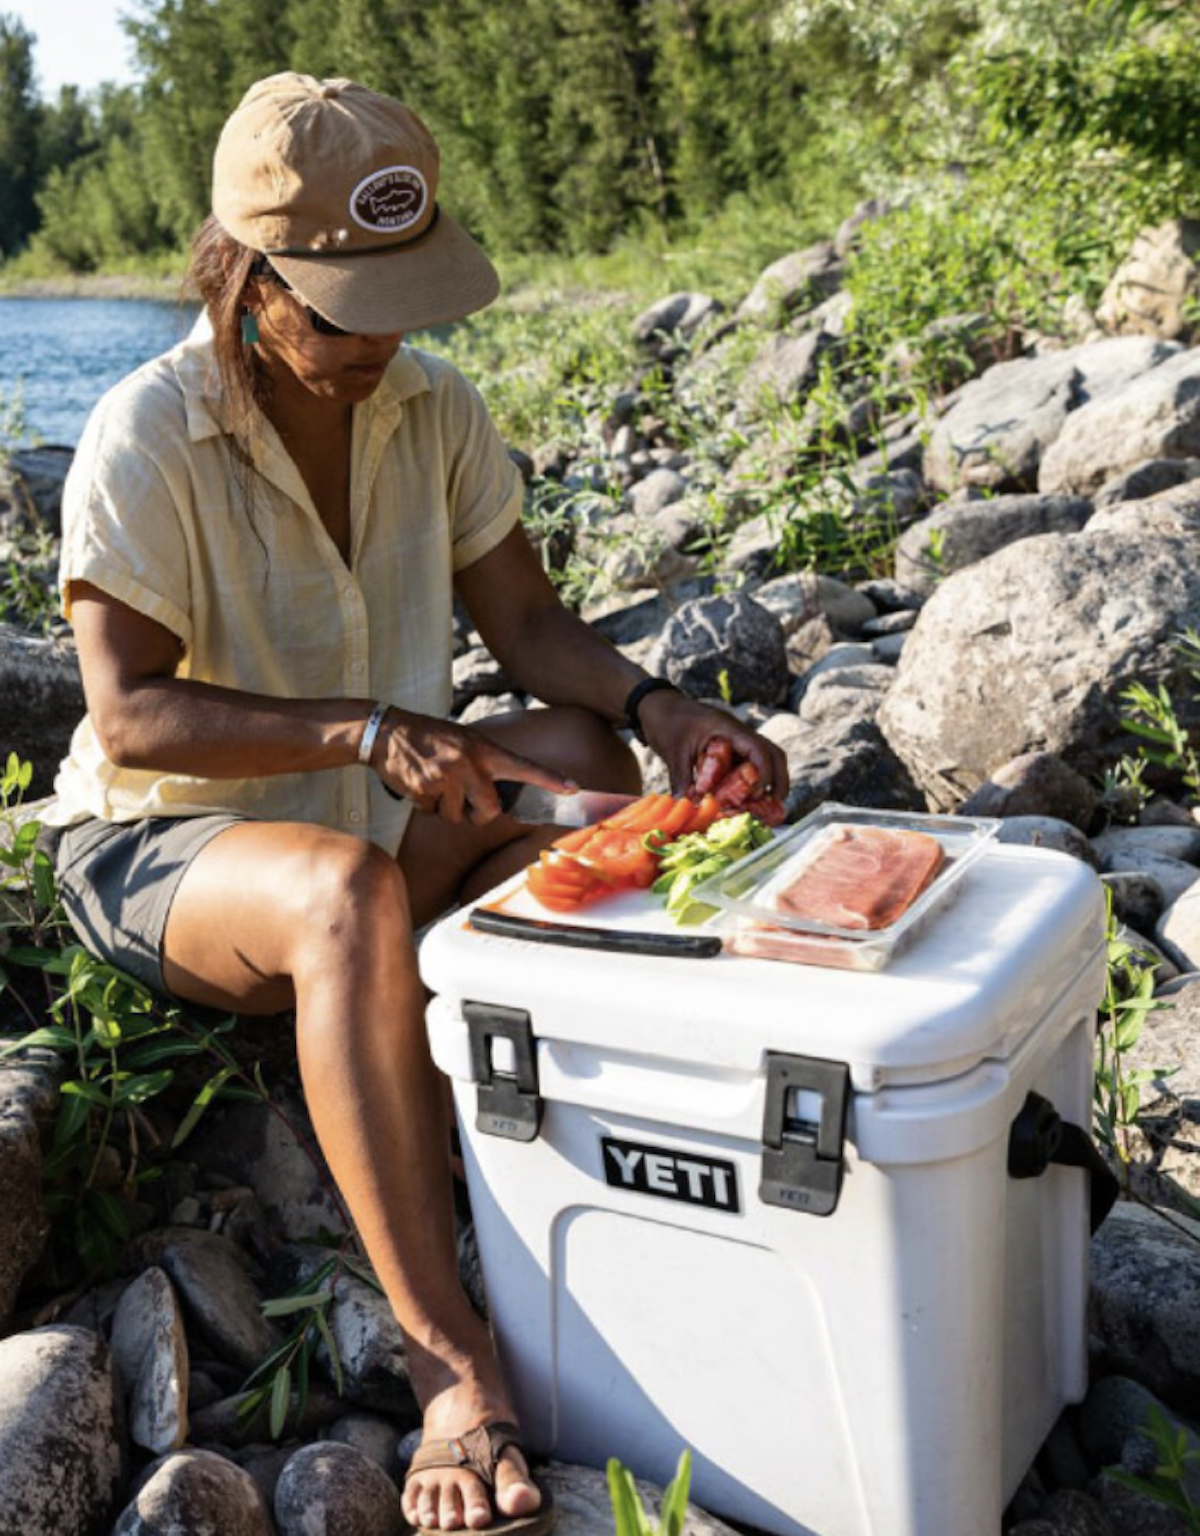 A woman preparing food on a white cooler